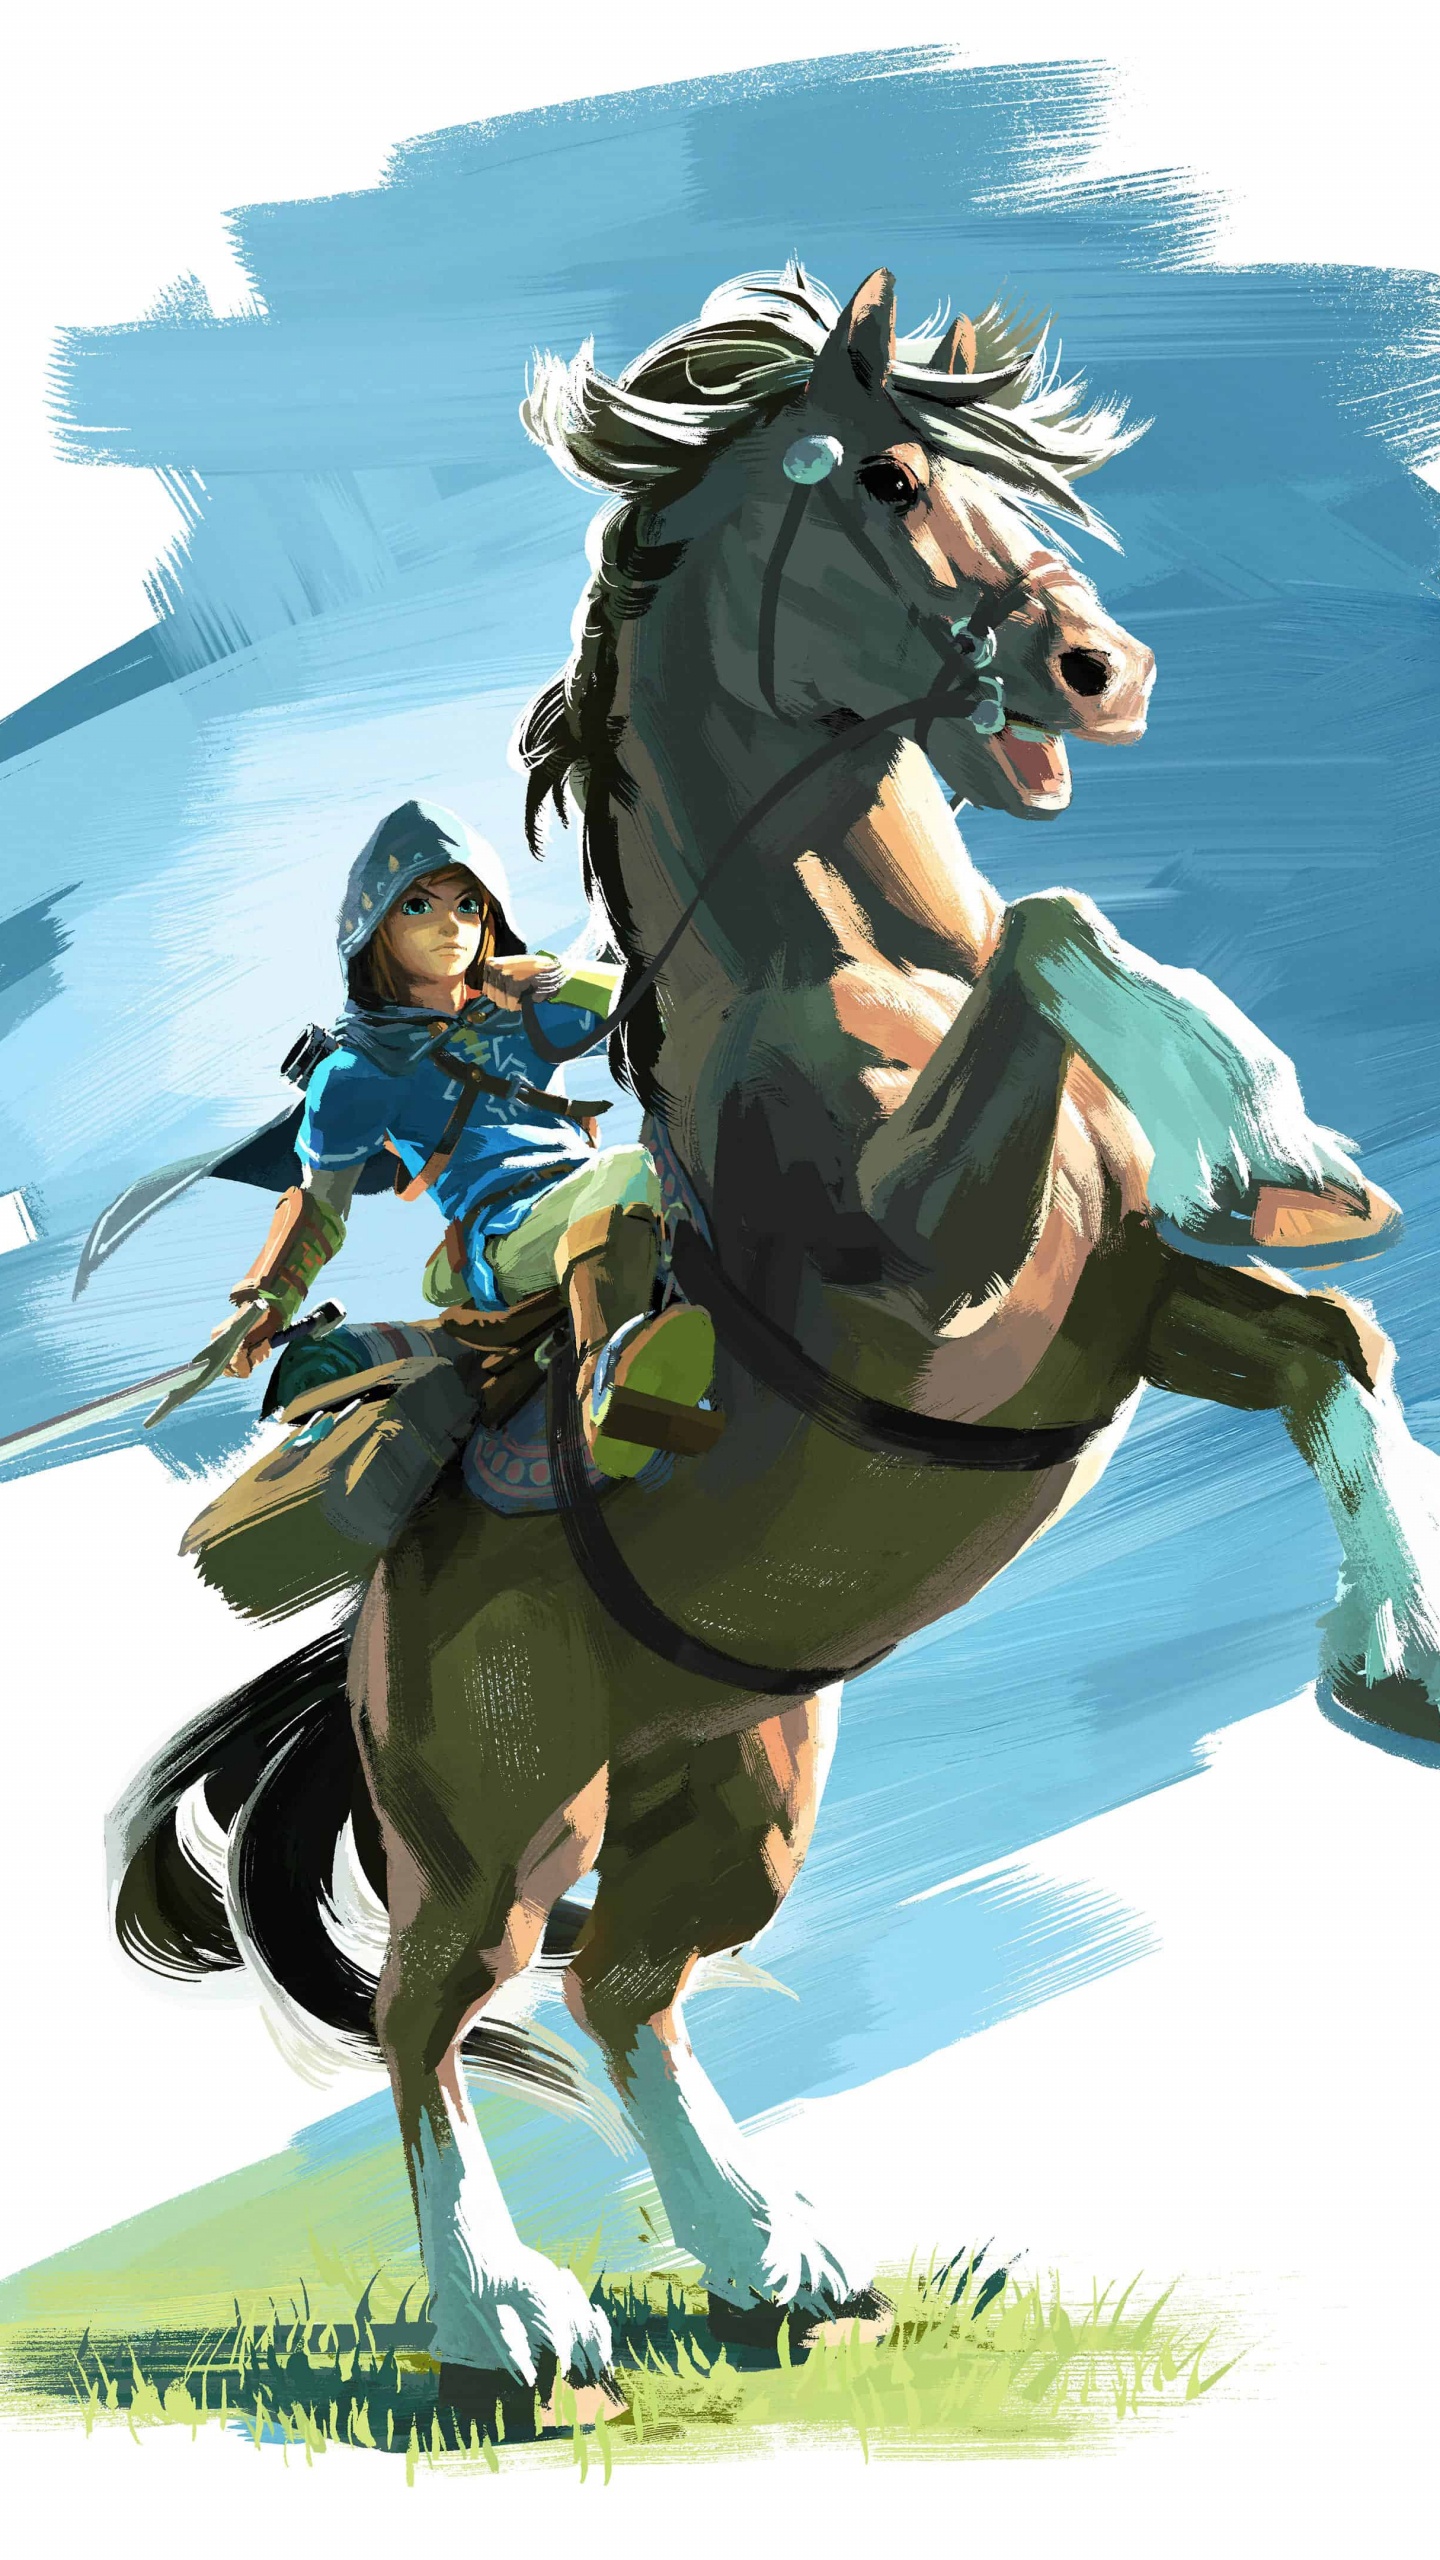 Woman in Blue Dress Riding White Horse Illustration. Wallpaper in 1440x2560 Resolution